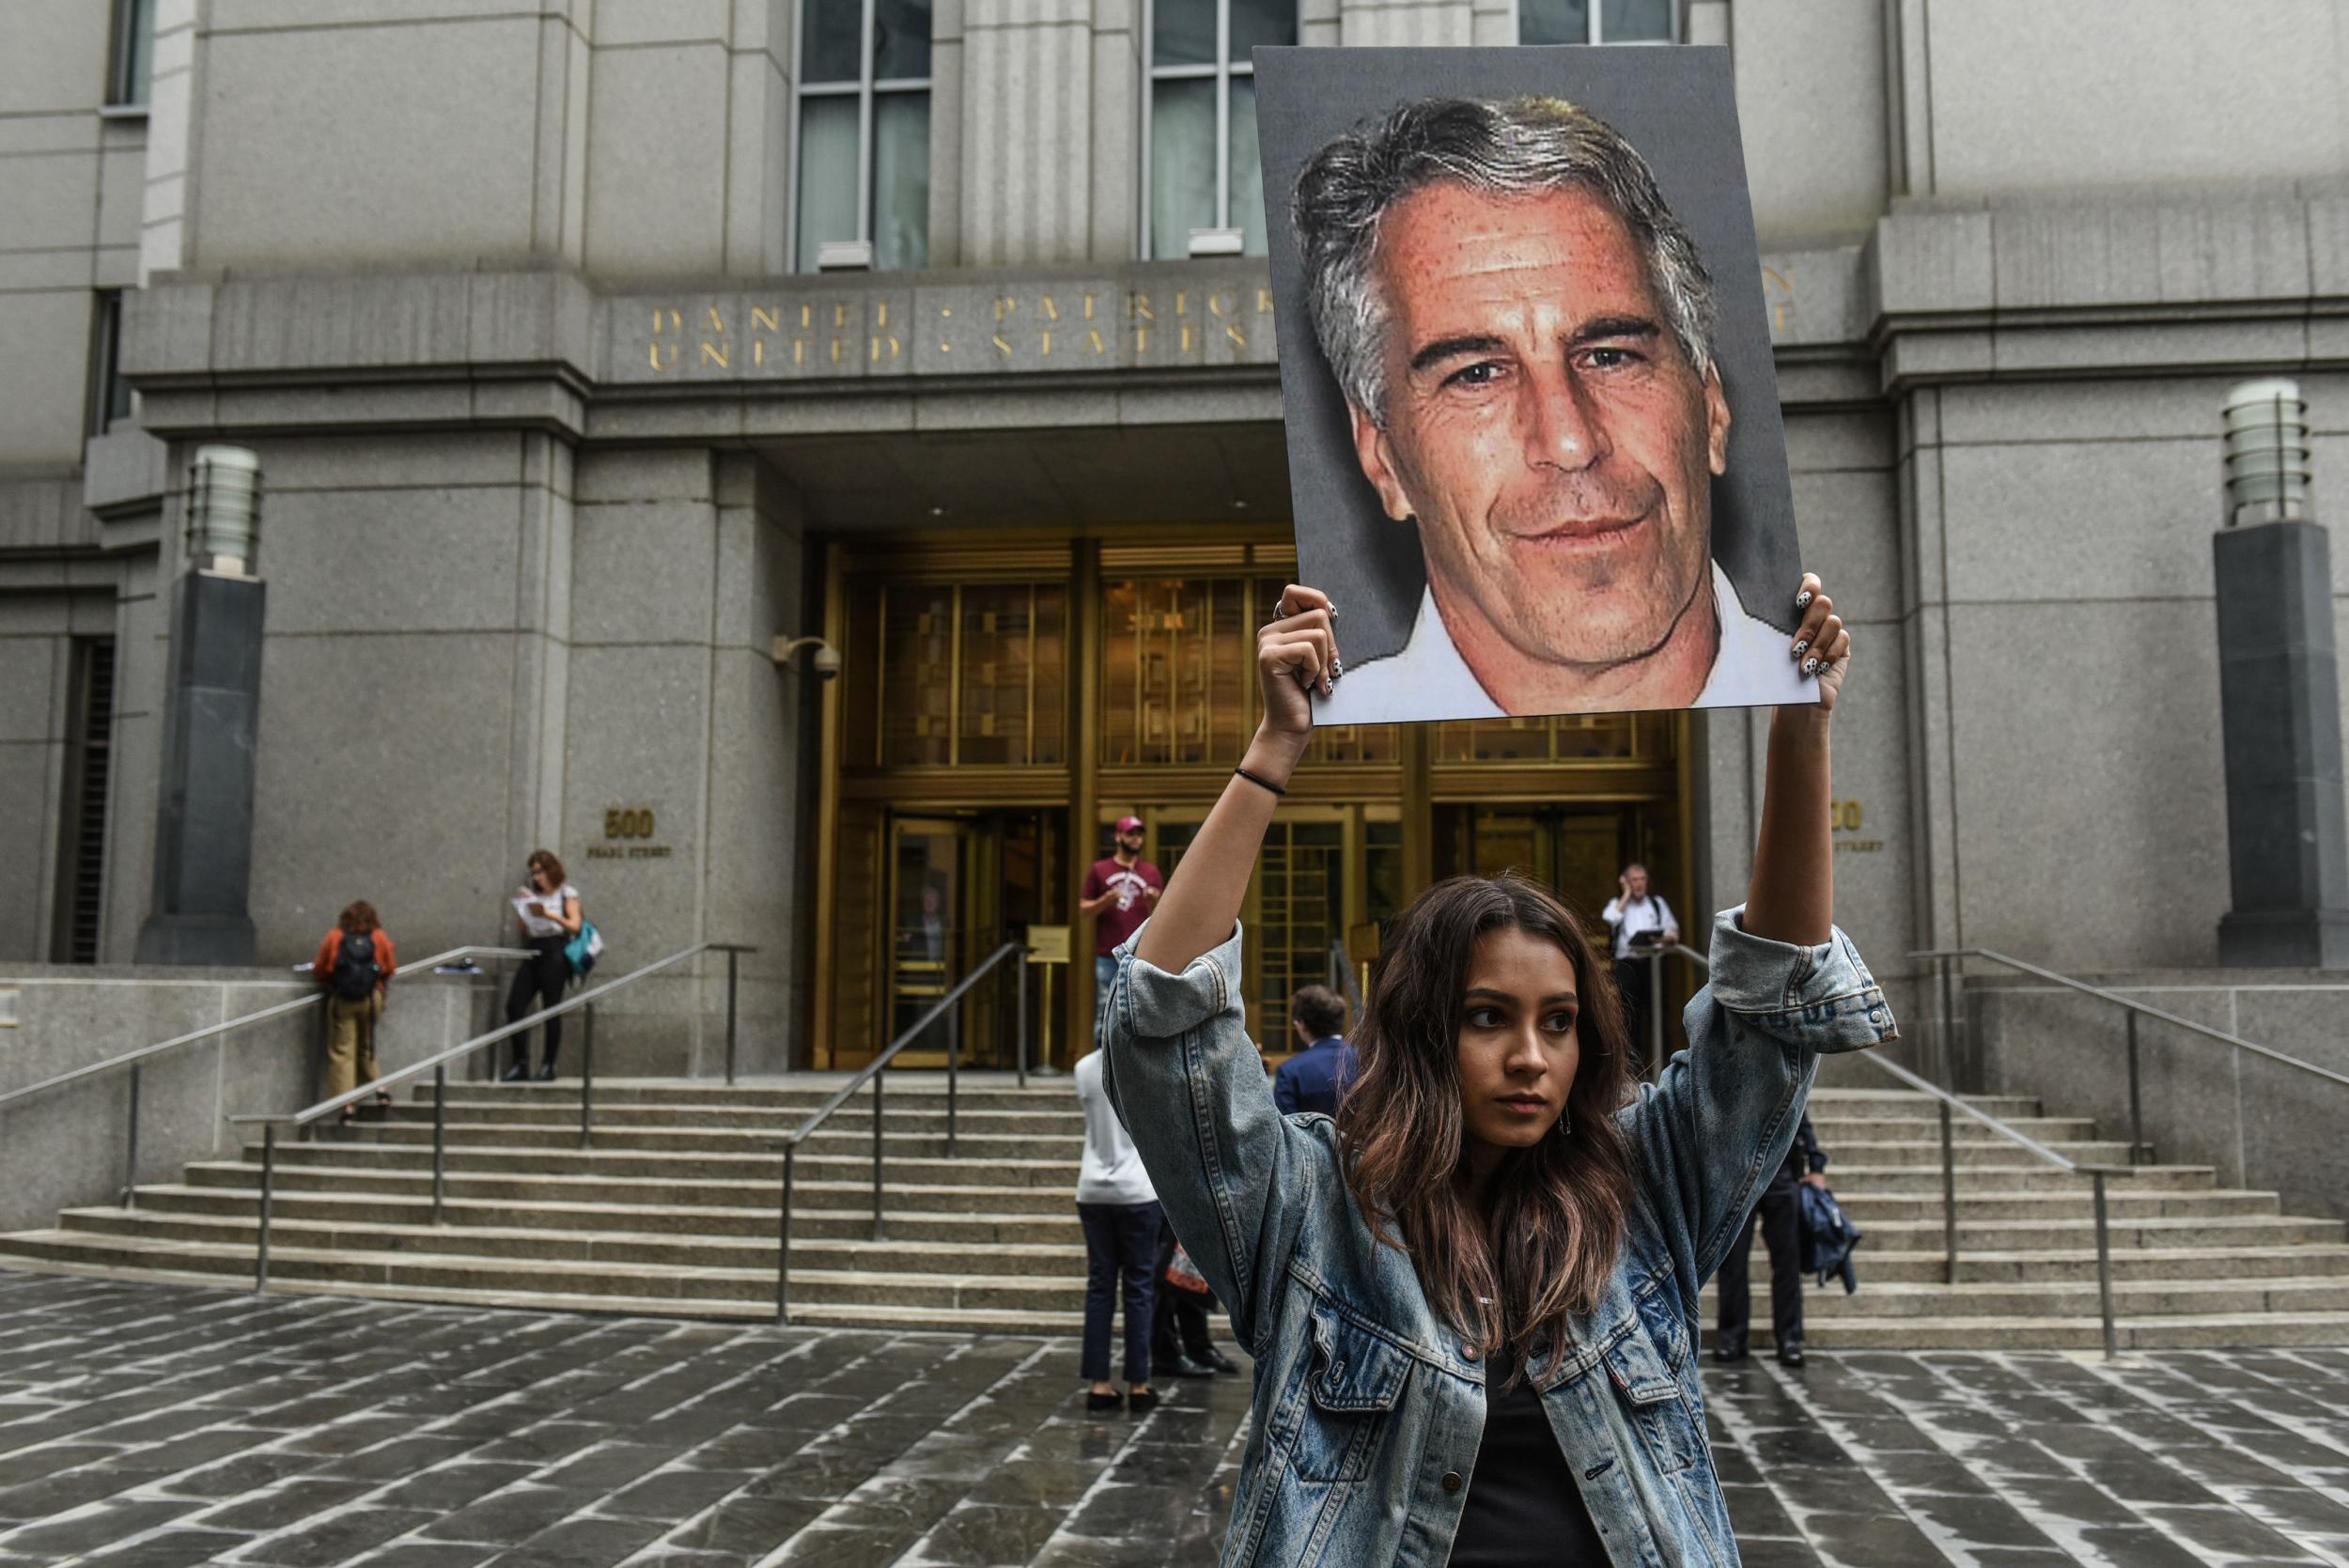 Jeffrey Epstein: Paedophile financier offers private jet and mansion to avoid pre-trial jail